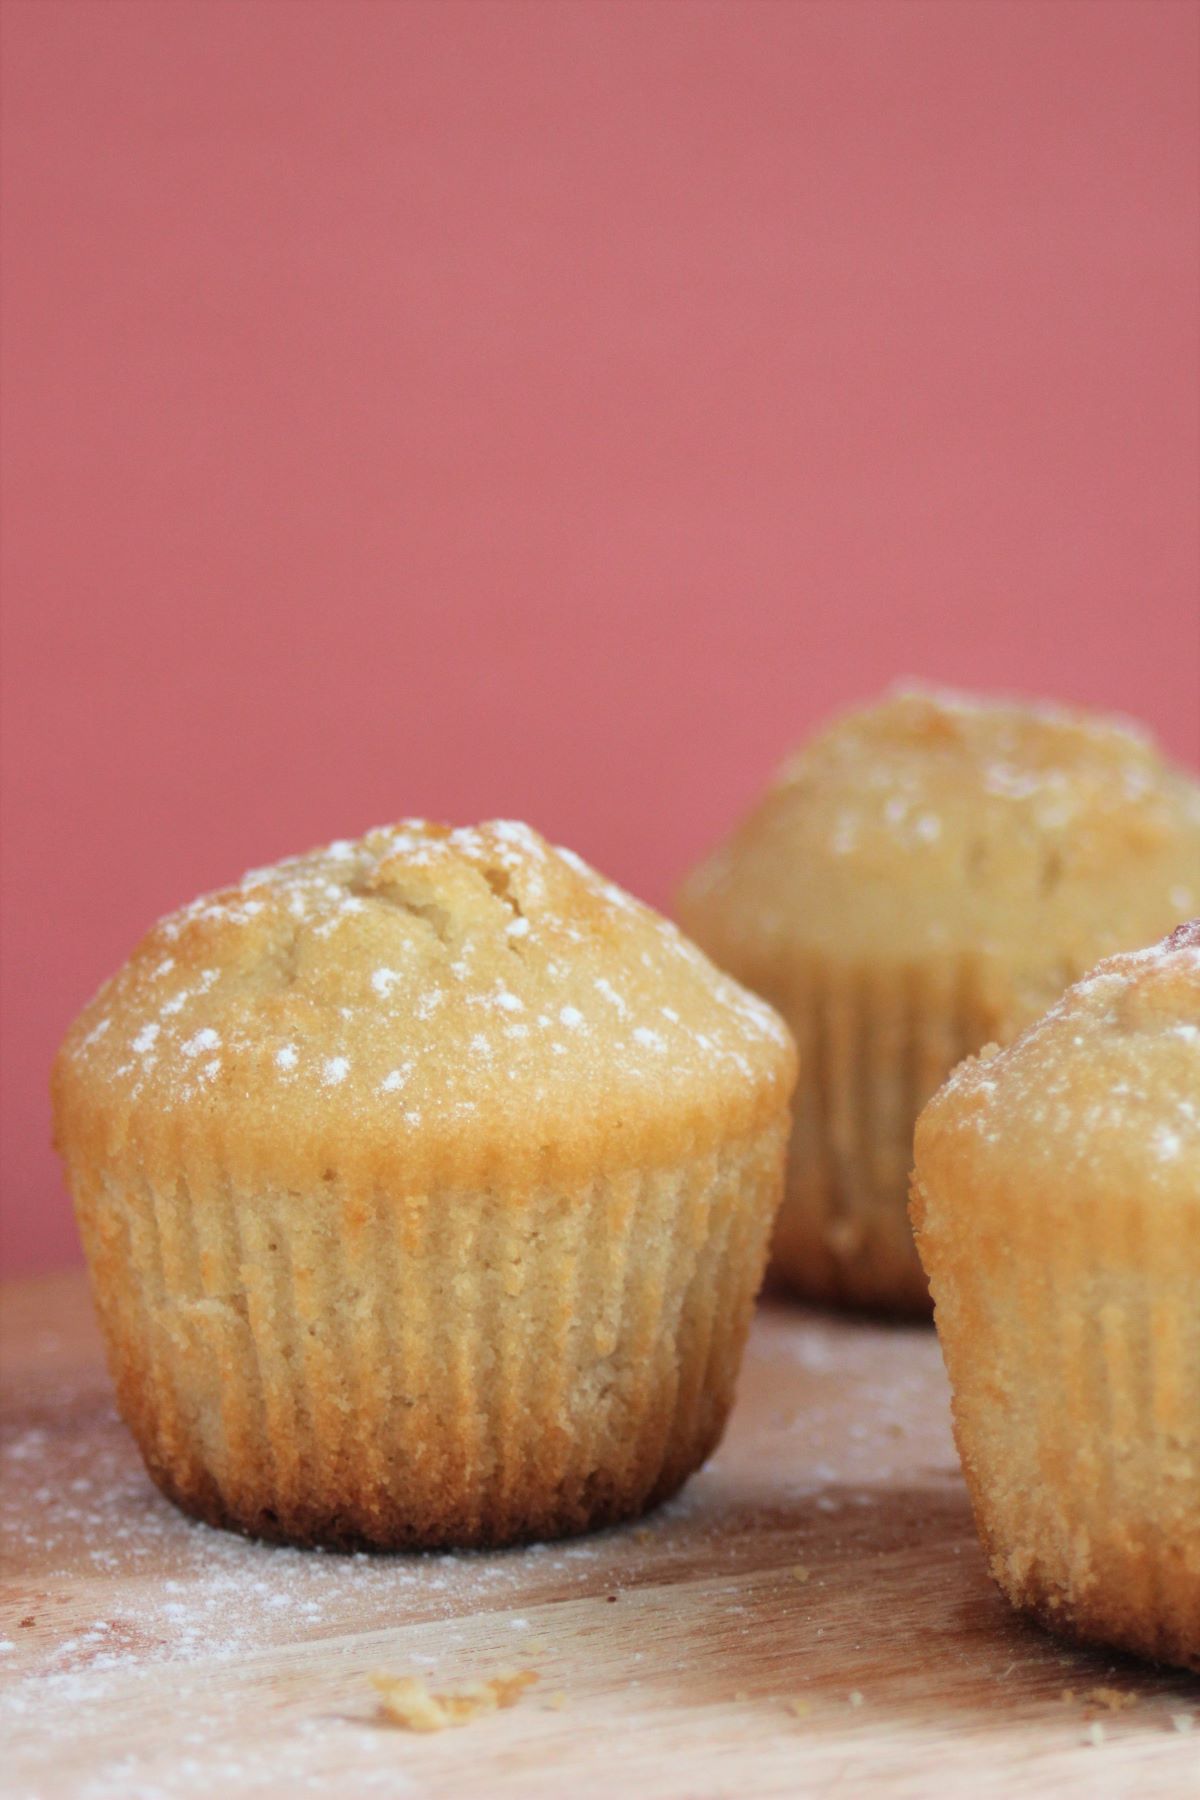 Pear and ginger muffins on a wood surface. Pink background.